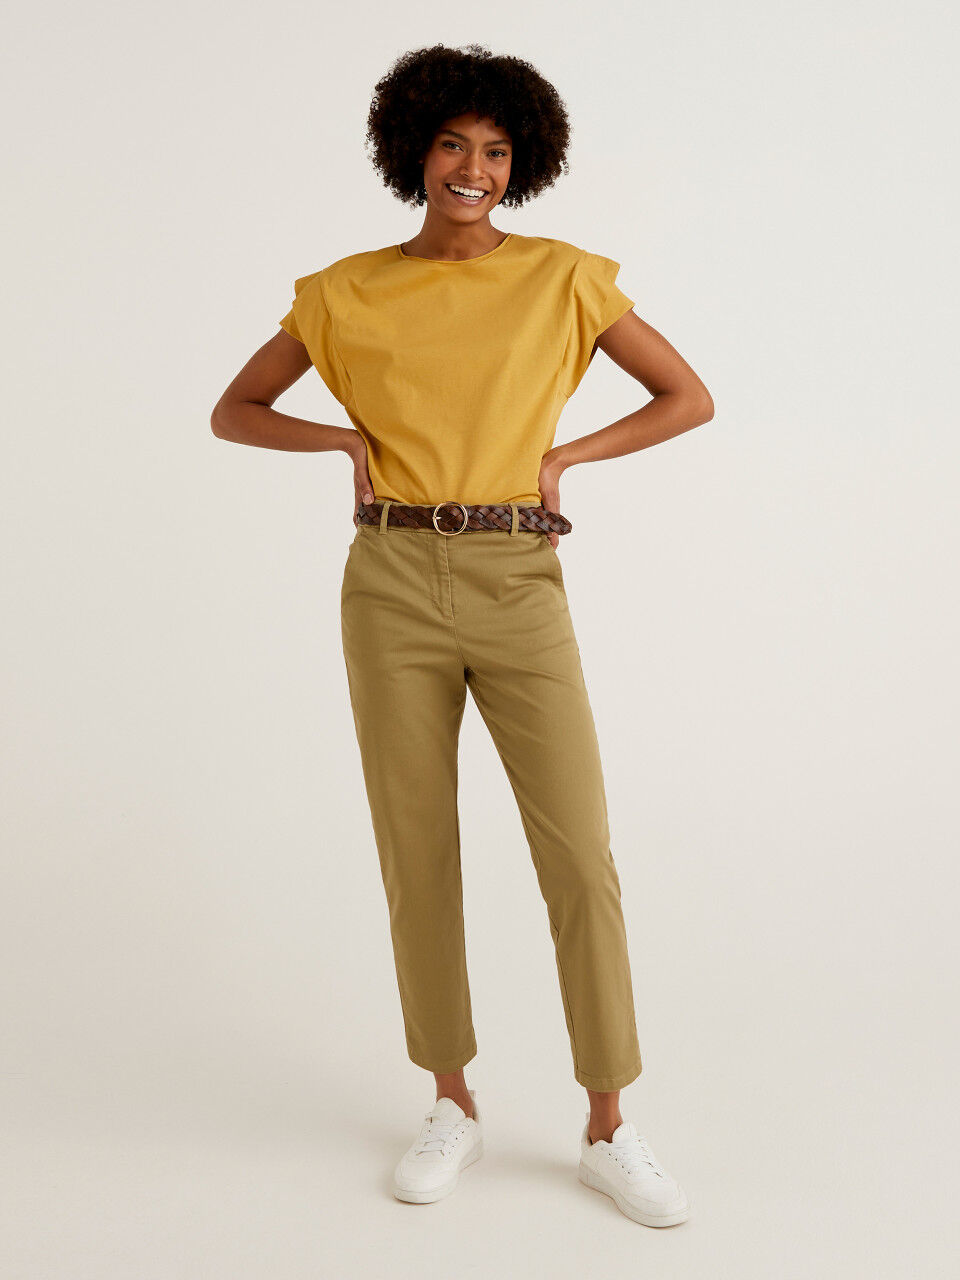 Benetton Pantalone 4gd757533 Pants in Natural Slacks and Chinos Save 21% Womens Trousers Slacks and Chinos Benetton Trousers 